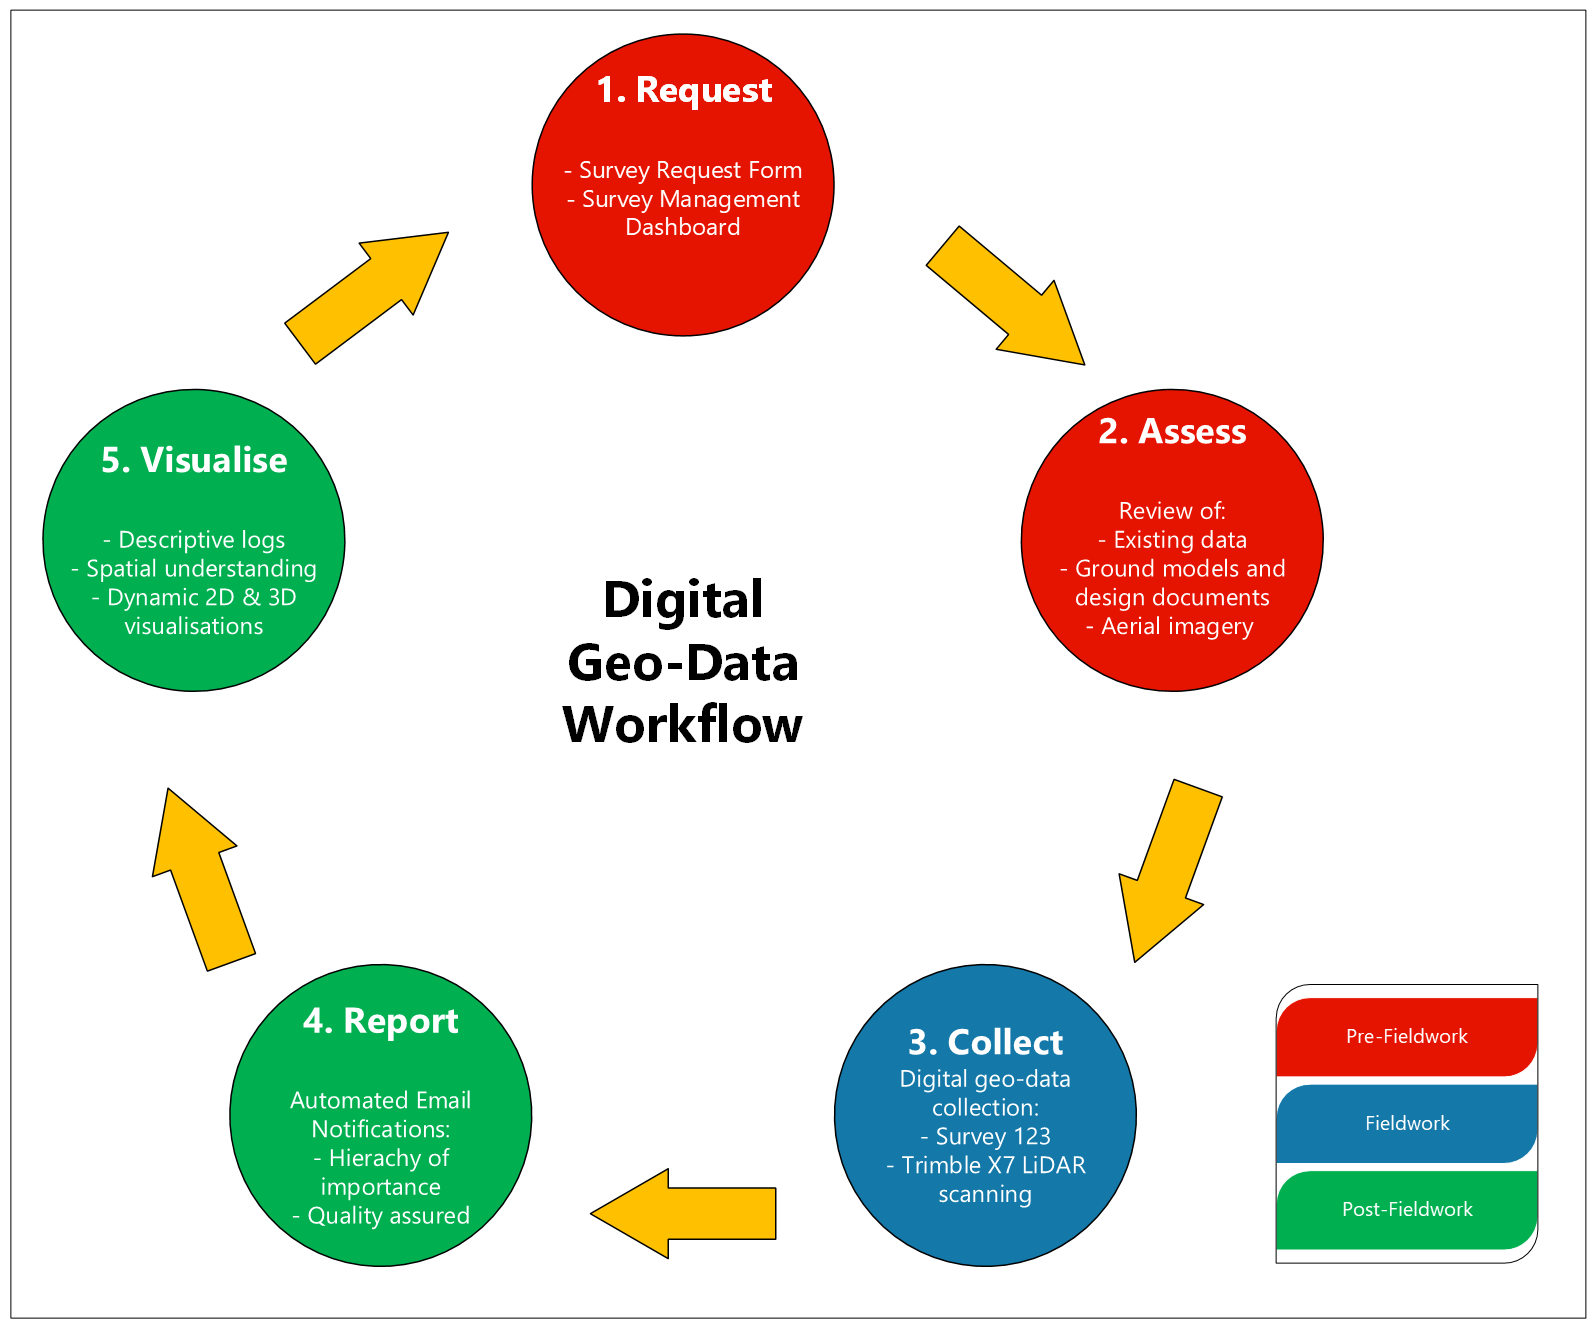 A diagram of the five stages of the digital geo-data workflow